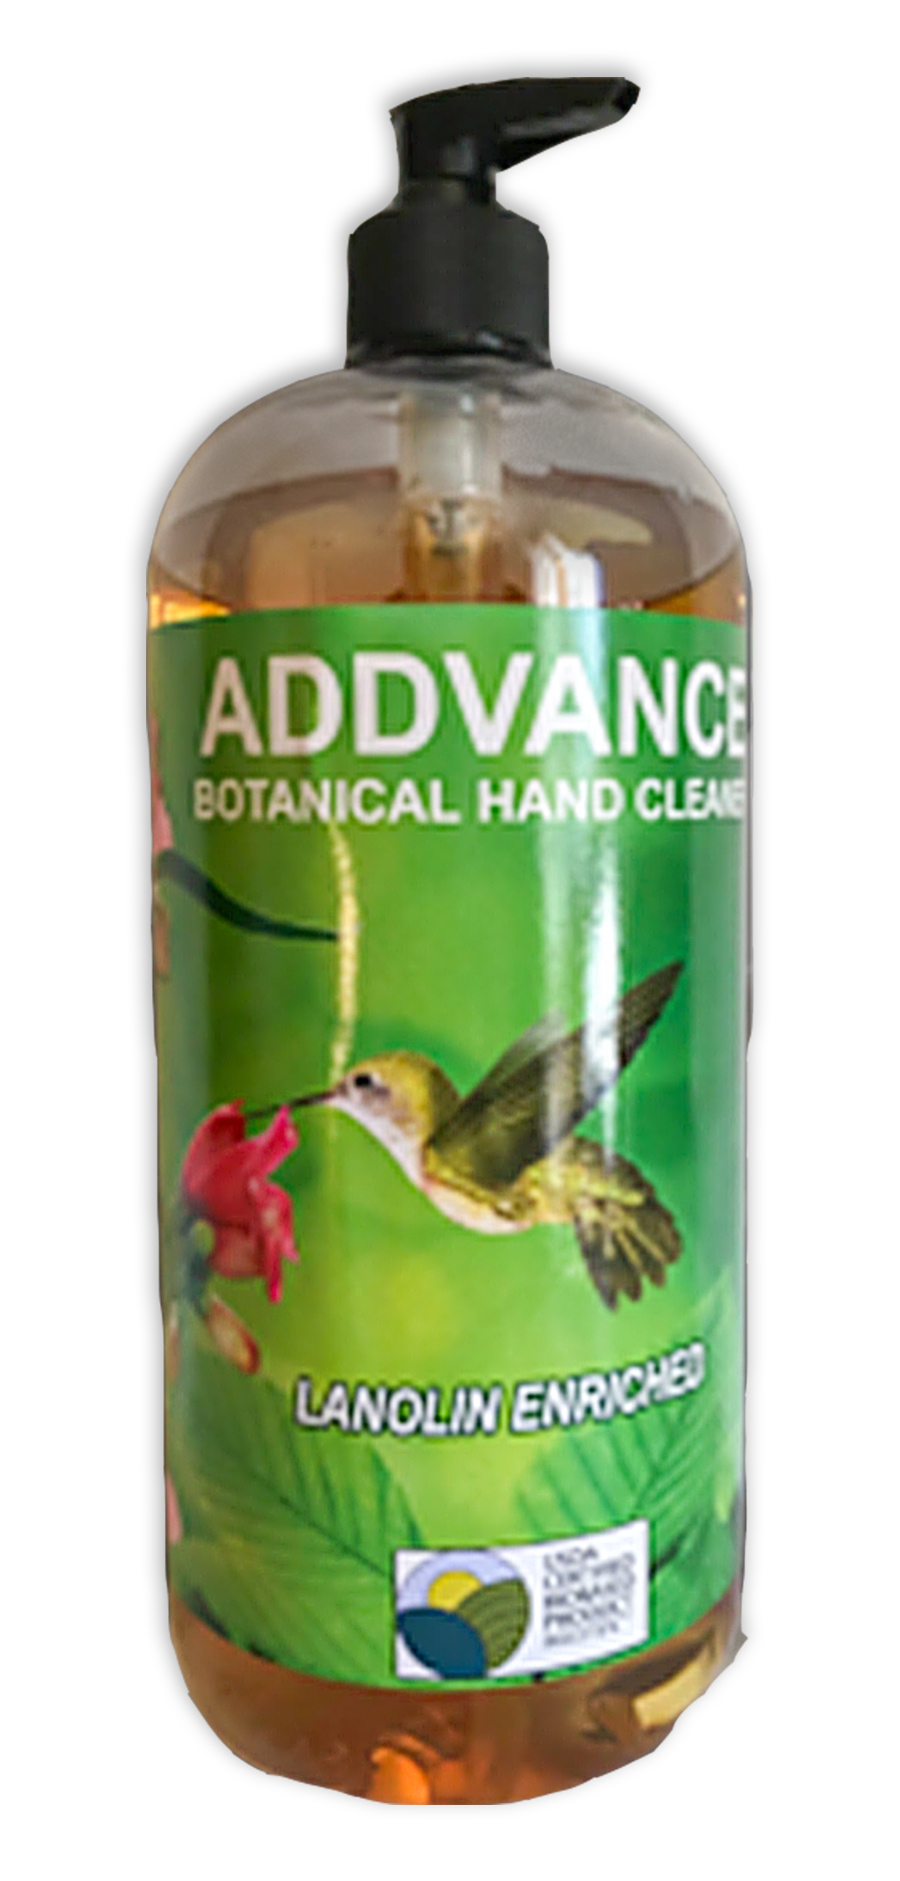 Duplicate of Addvance Botanical Hand Cleaner